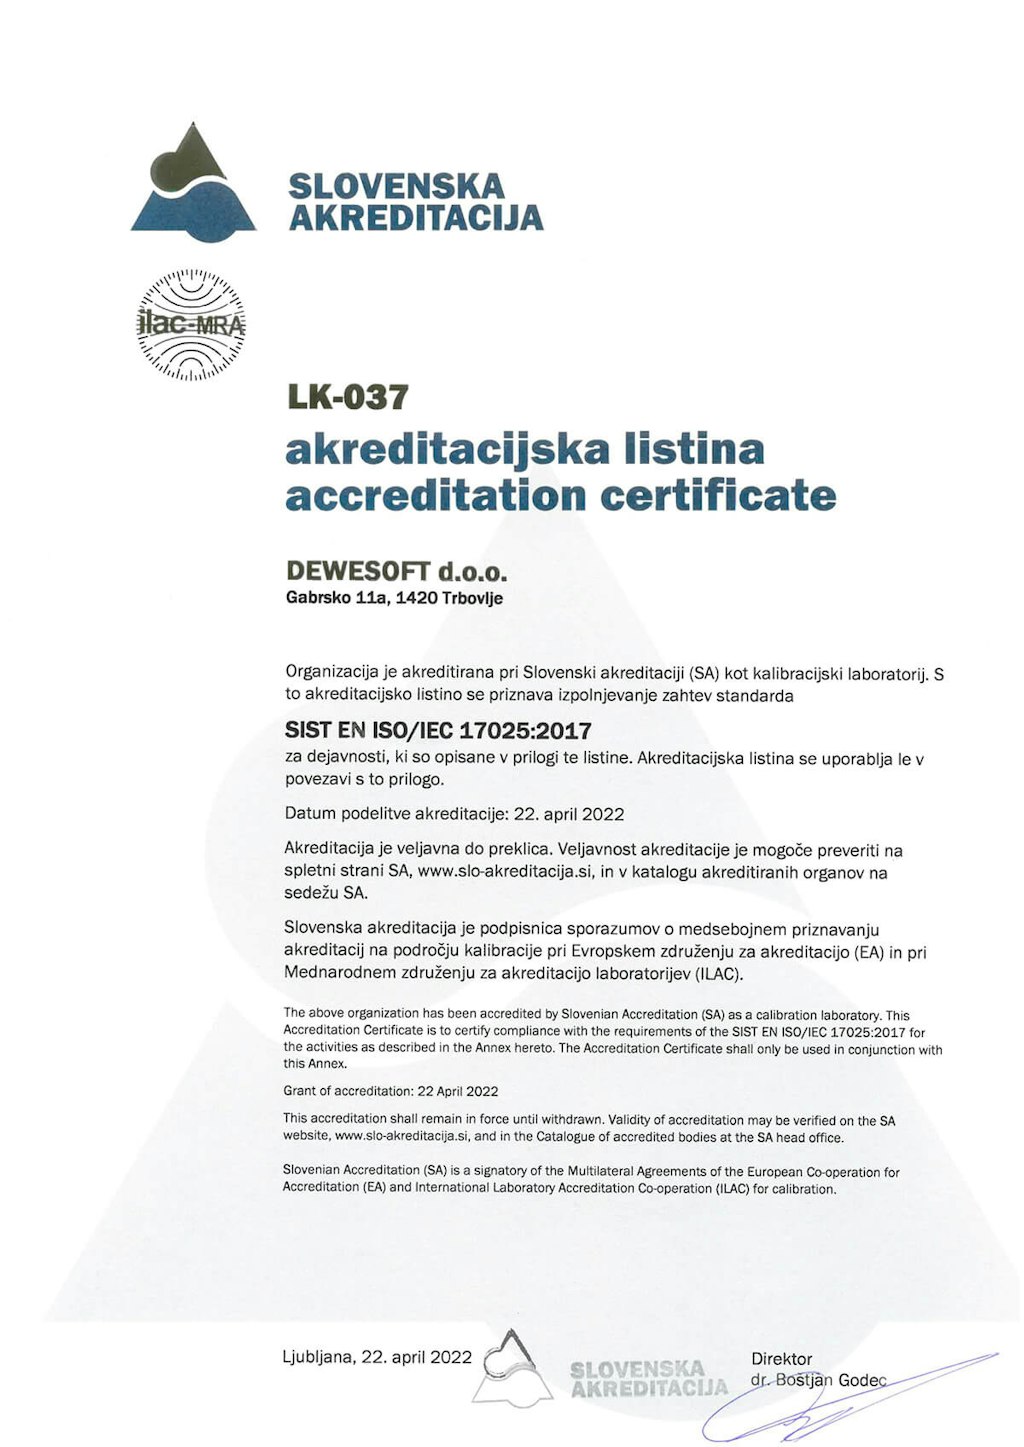 Accreditation certificate for Dewesoft laboratory